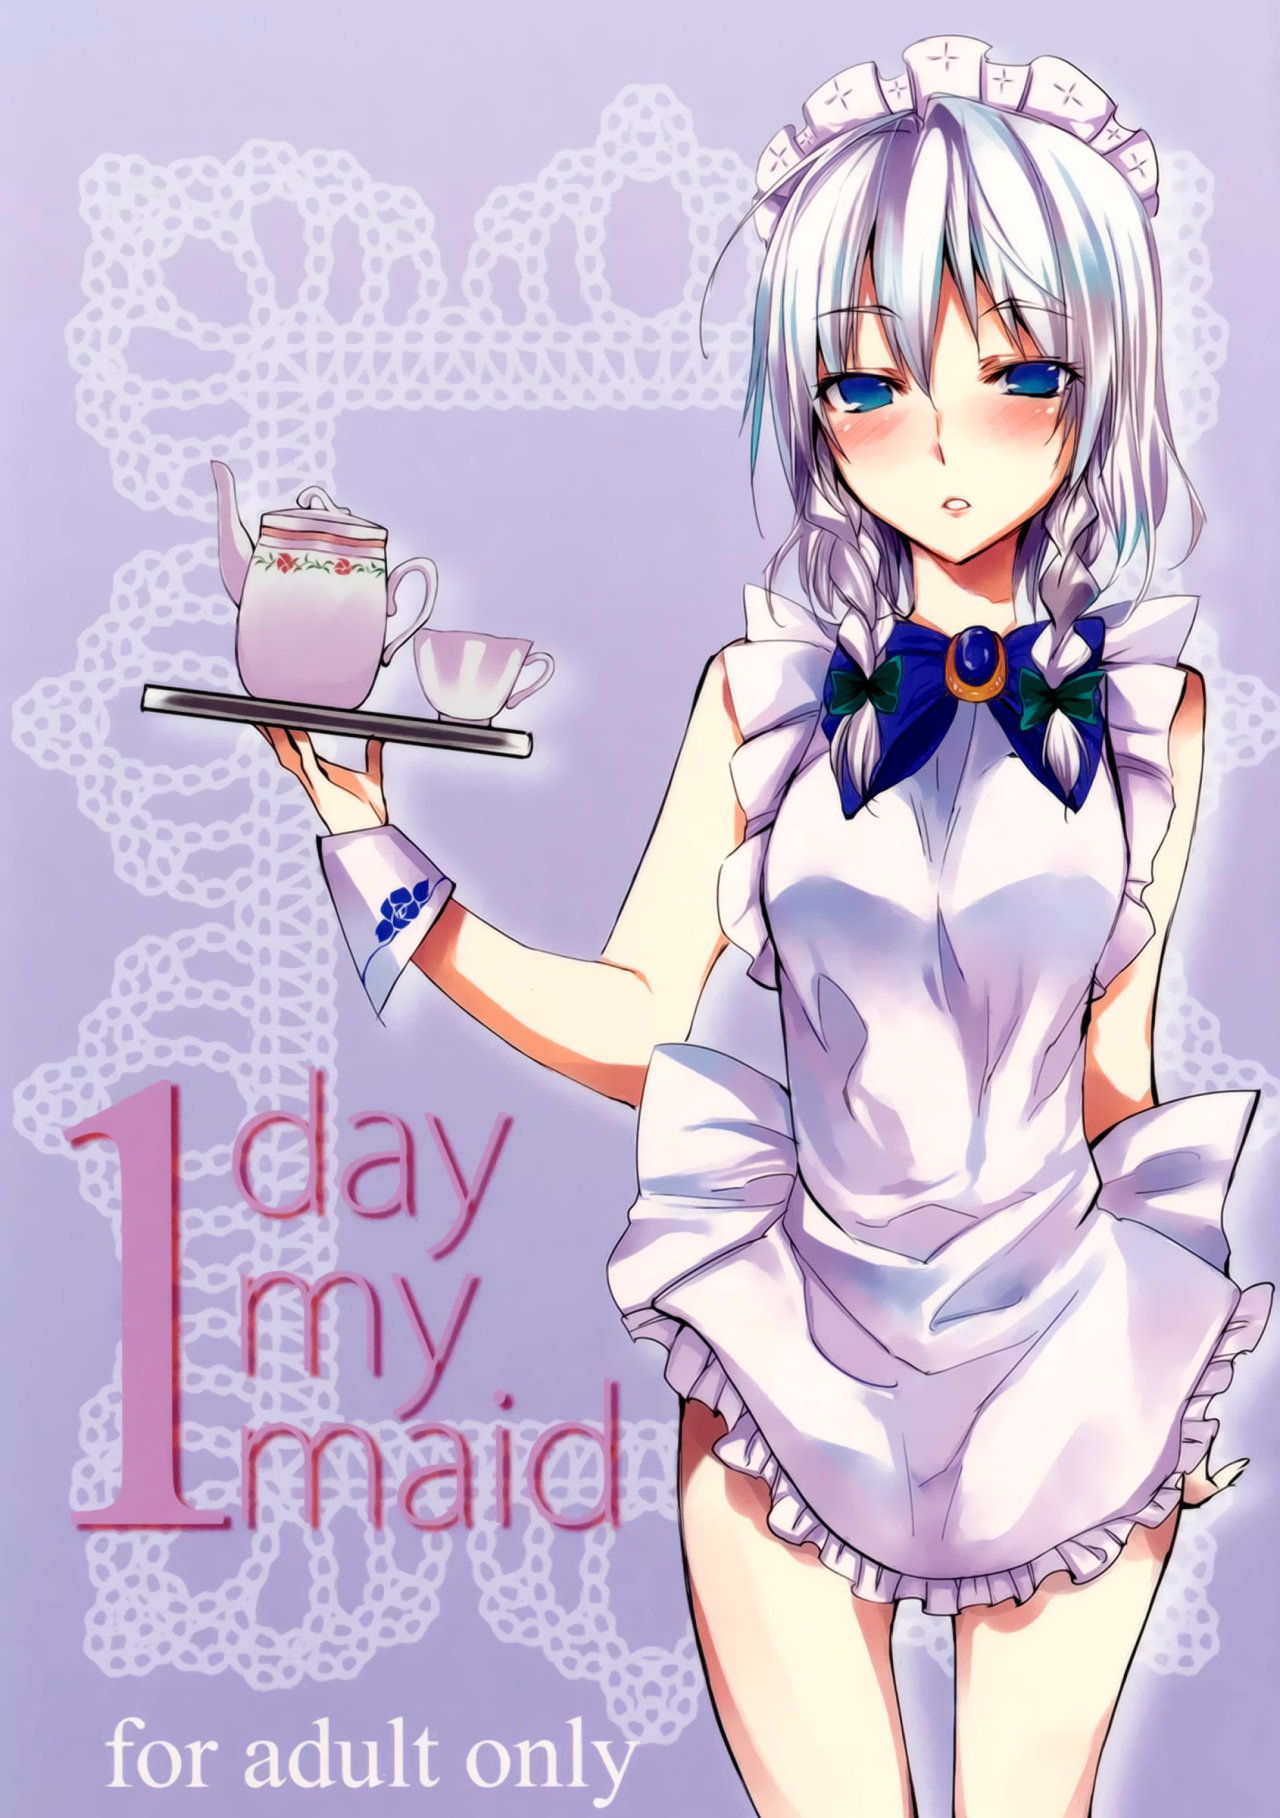 1 day my maid (Touhou Project) - 2